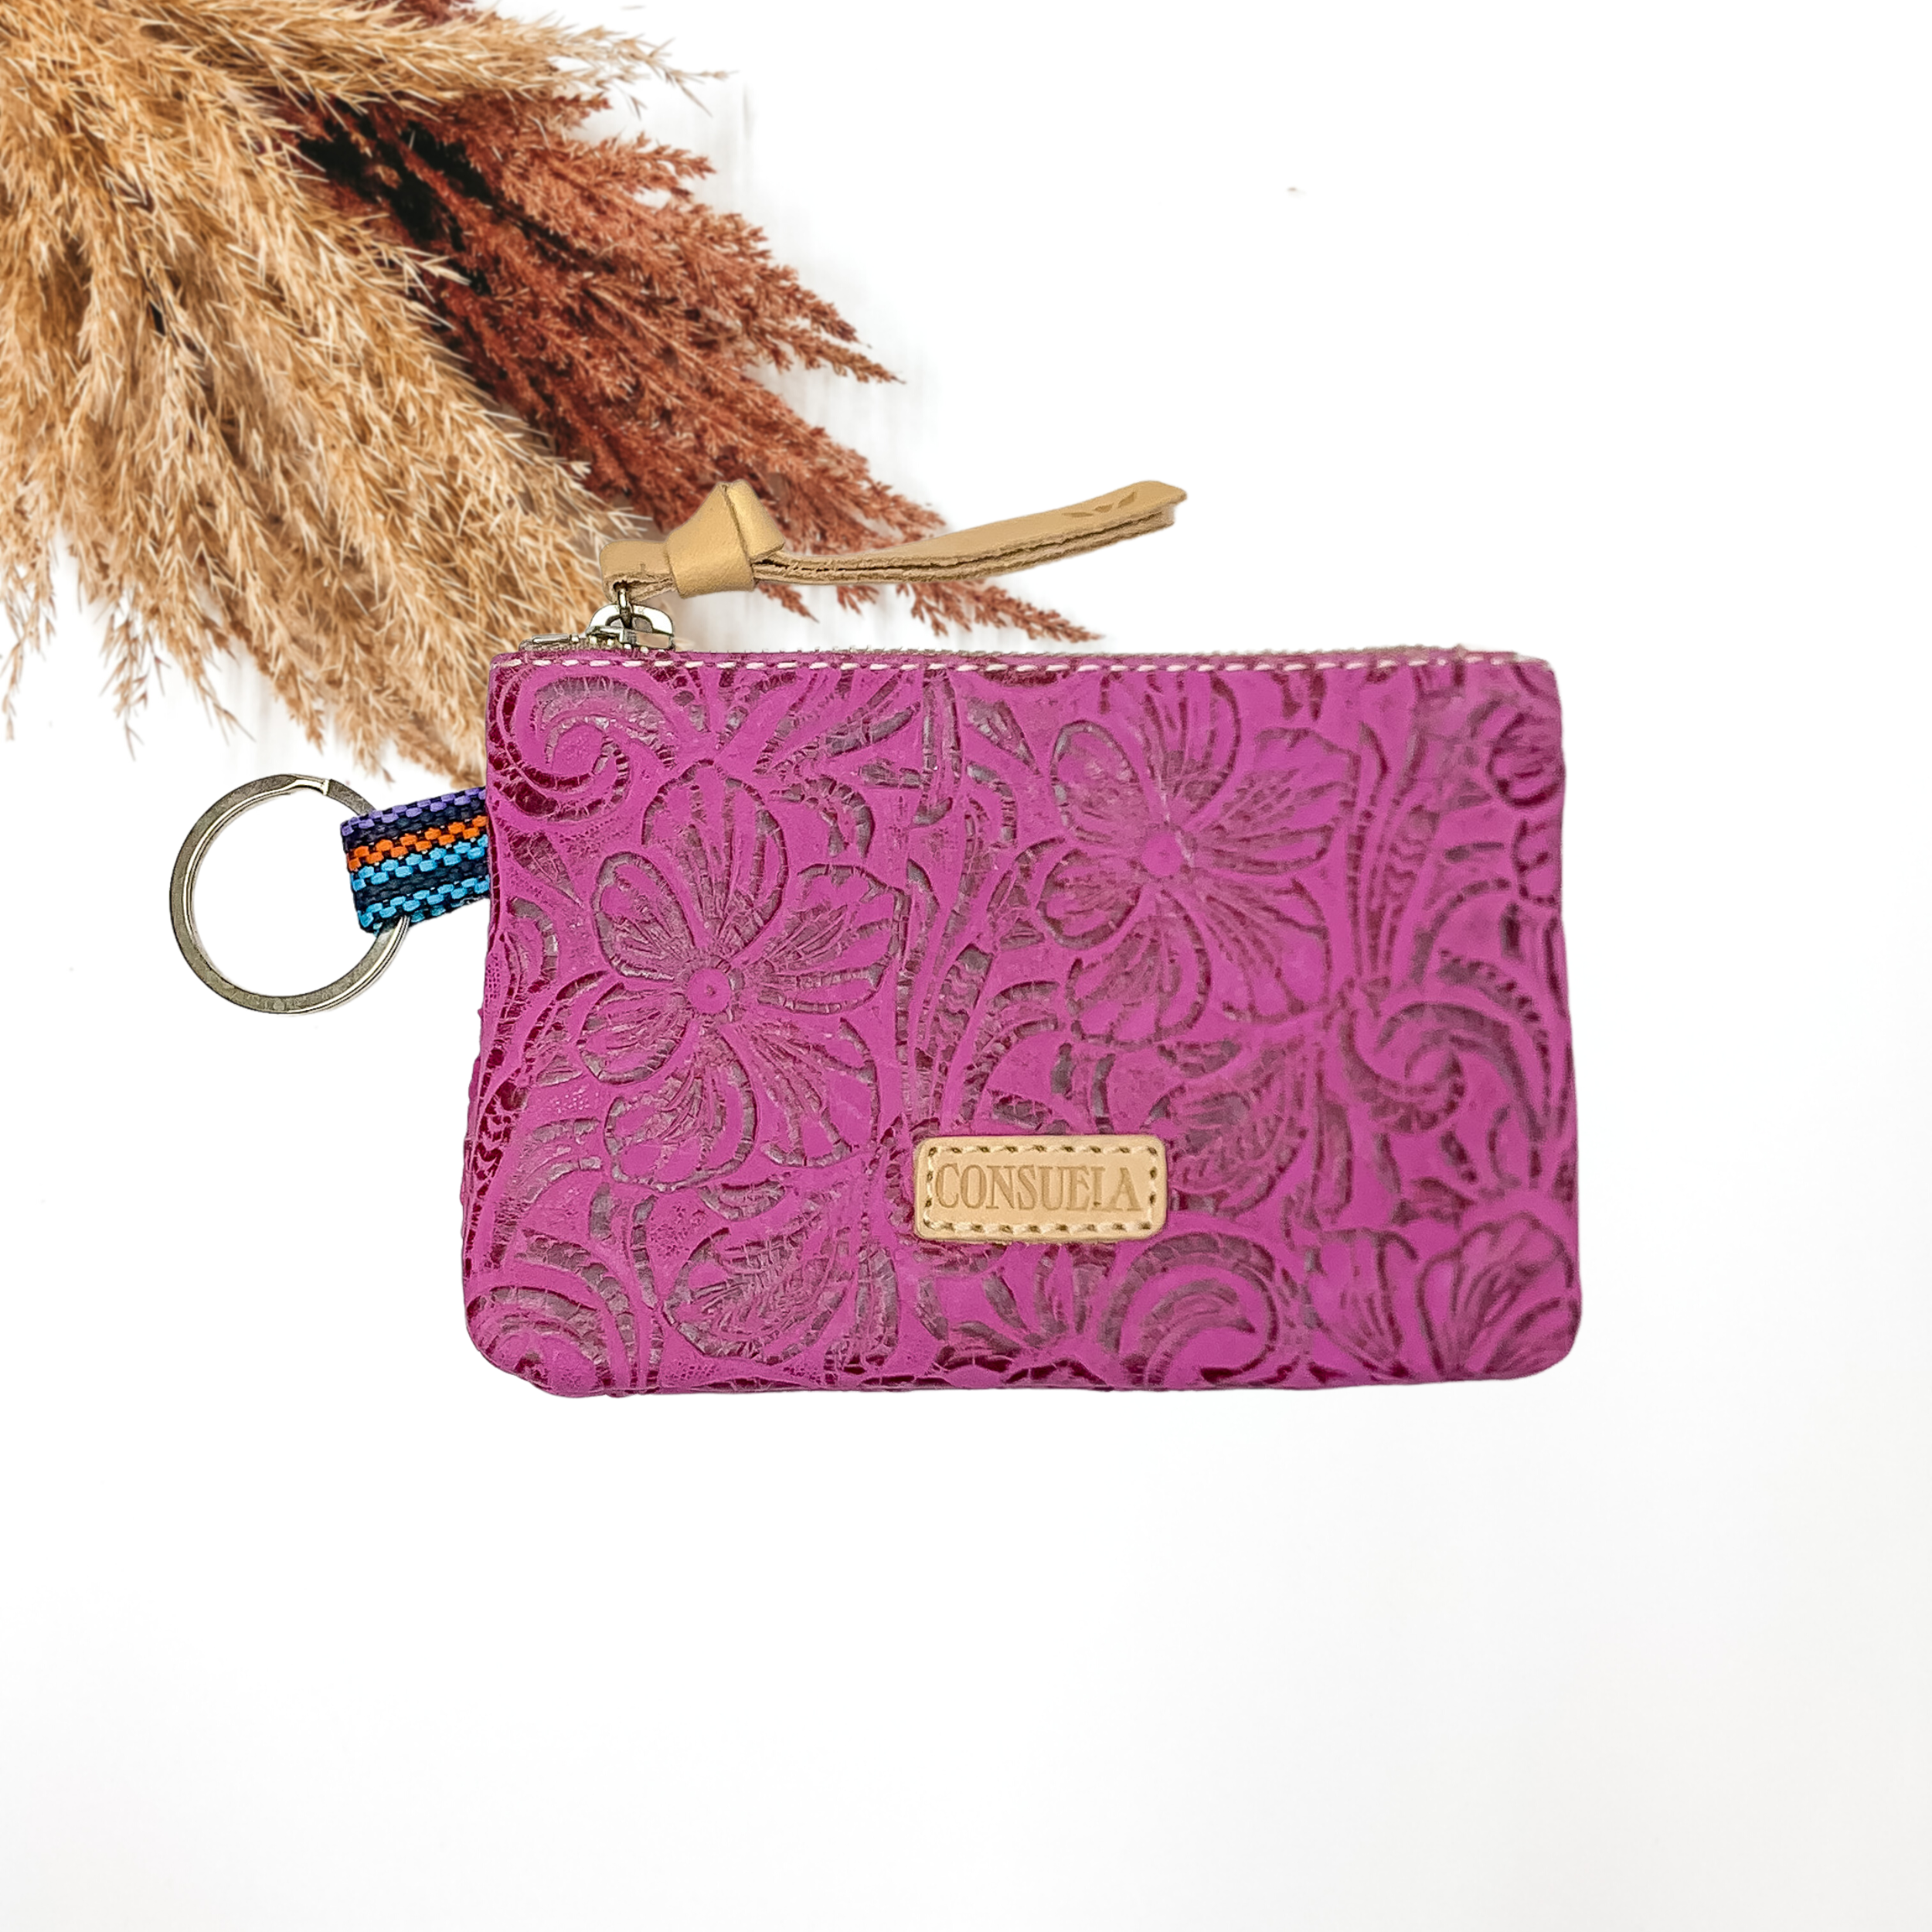 Pictured on a white background is a fuchsia, leather tooled pouch with a silver key ring and a leather tassel on the zipper. 